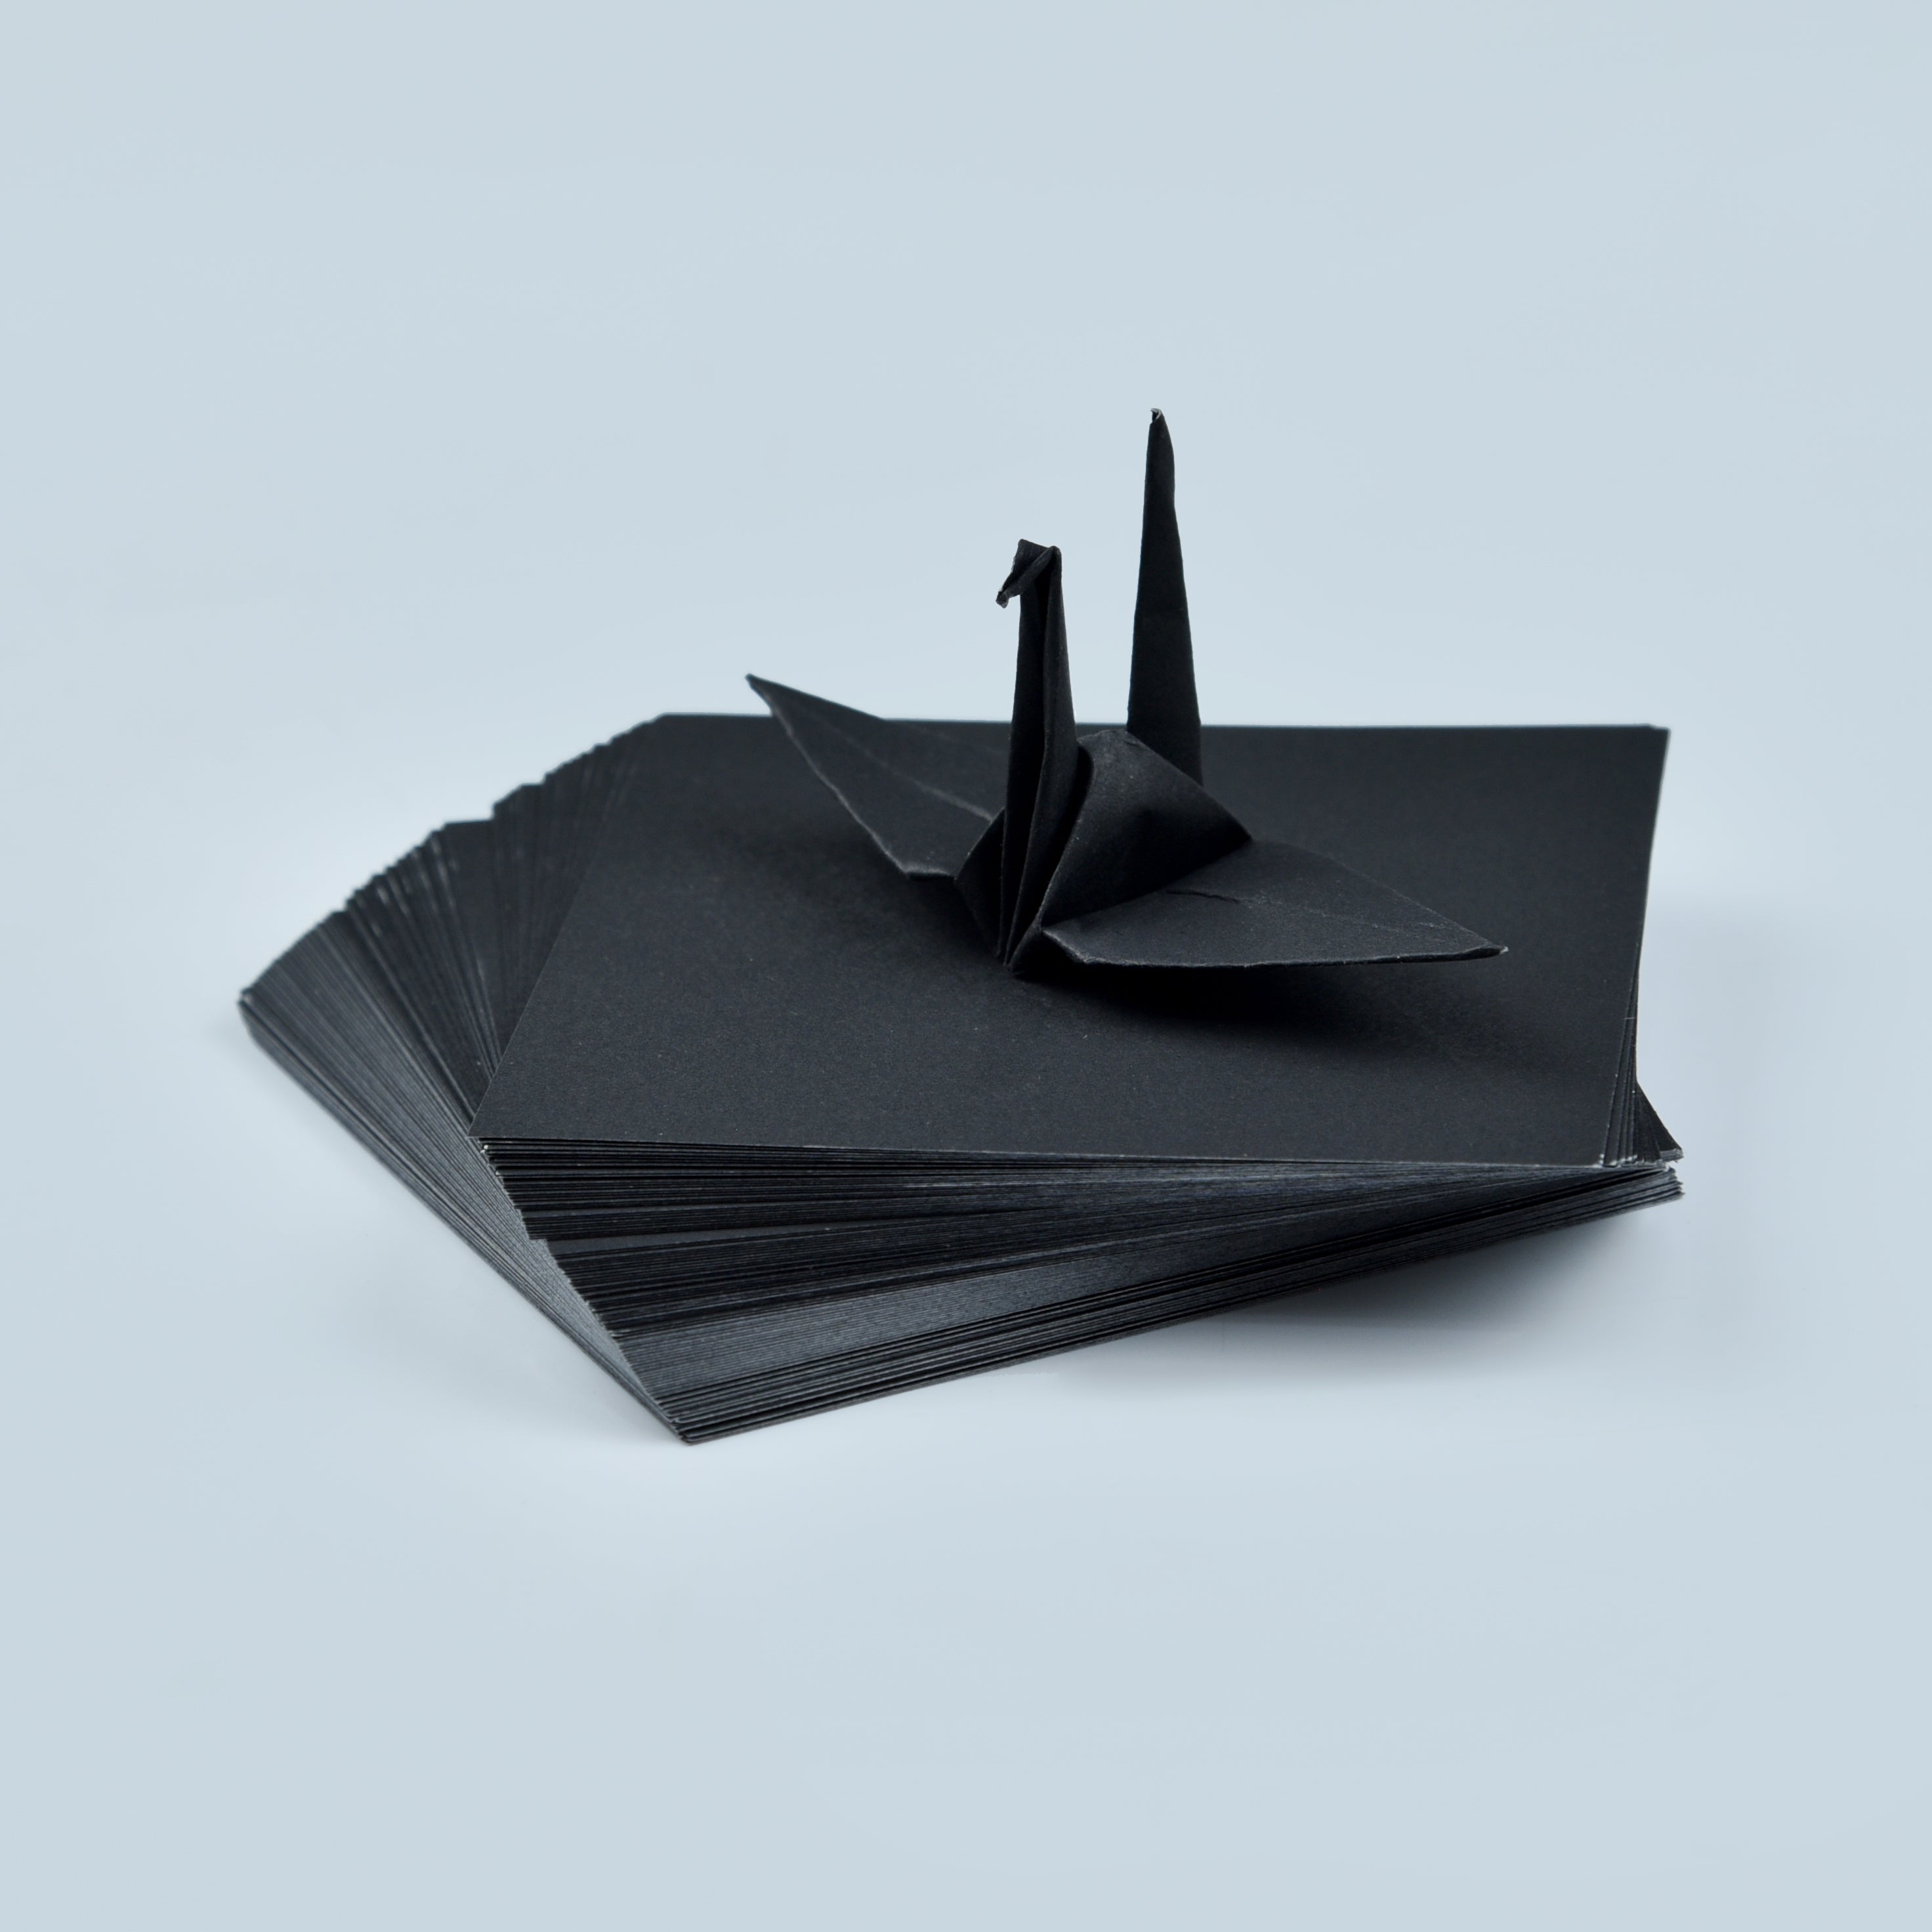 100 Black Origami Paper Sheets 3x3 inches Square Paper Pack for Folding, Origami Cranes, and Decoration - S11